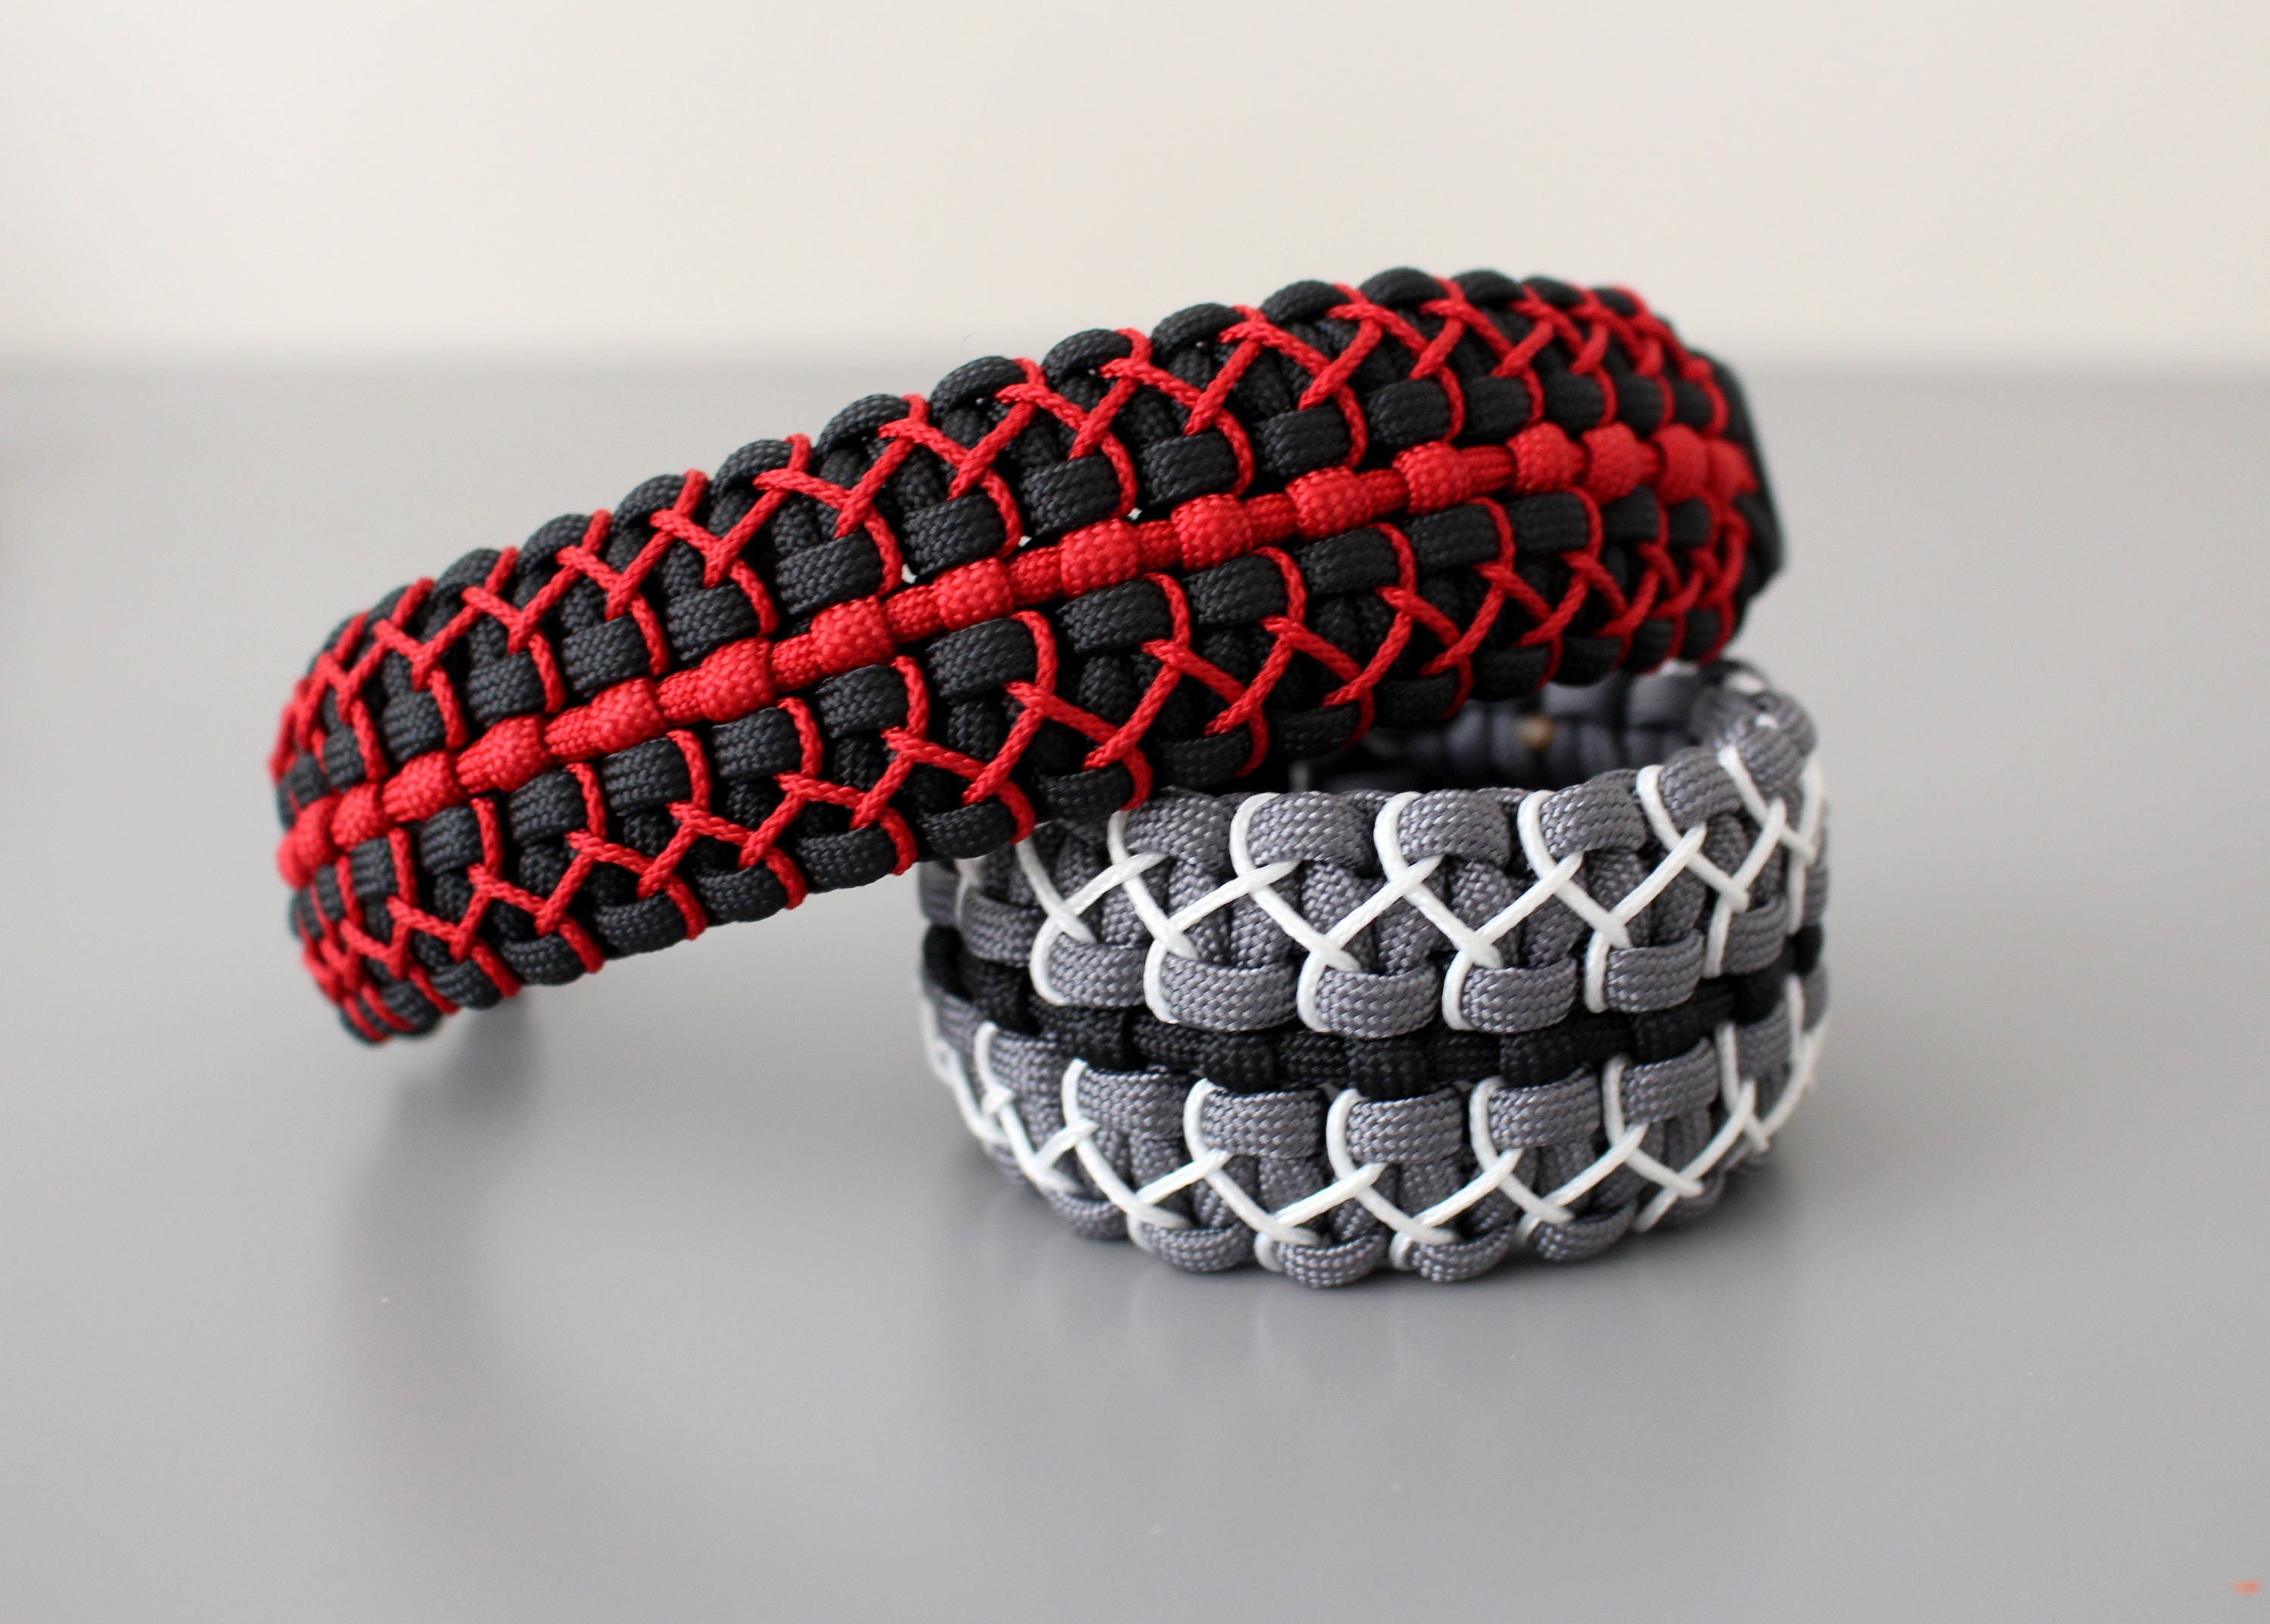 Solomon's Dragon Paracord Bracelet Buckles or Mad Max Style Custom Colours  